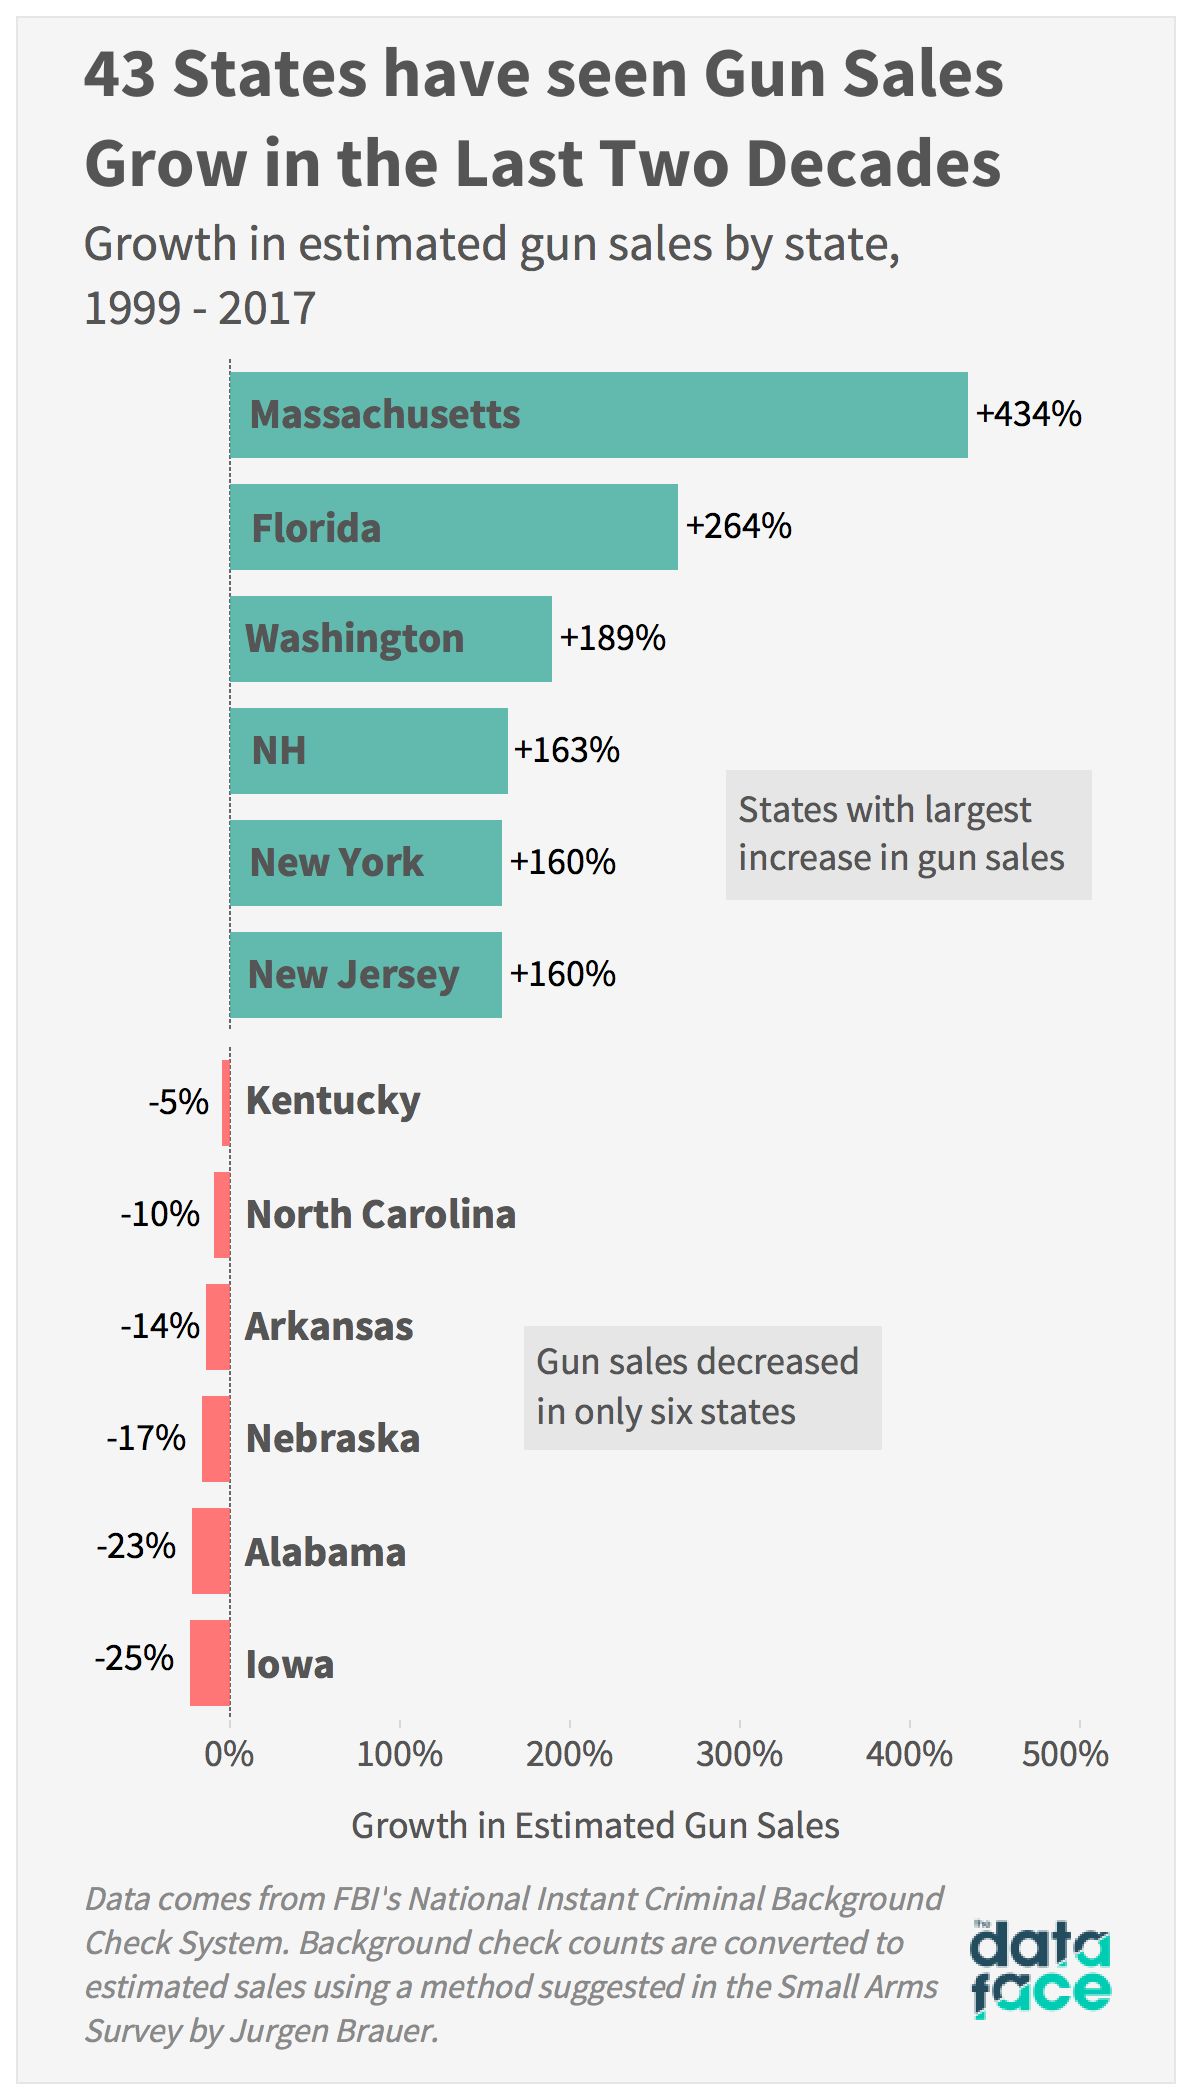 A Look at Gun Sales by State The DataFace